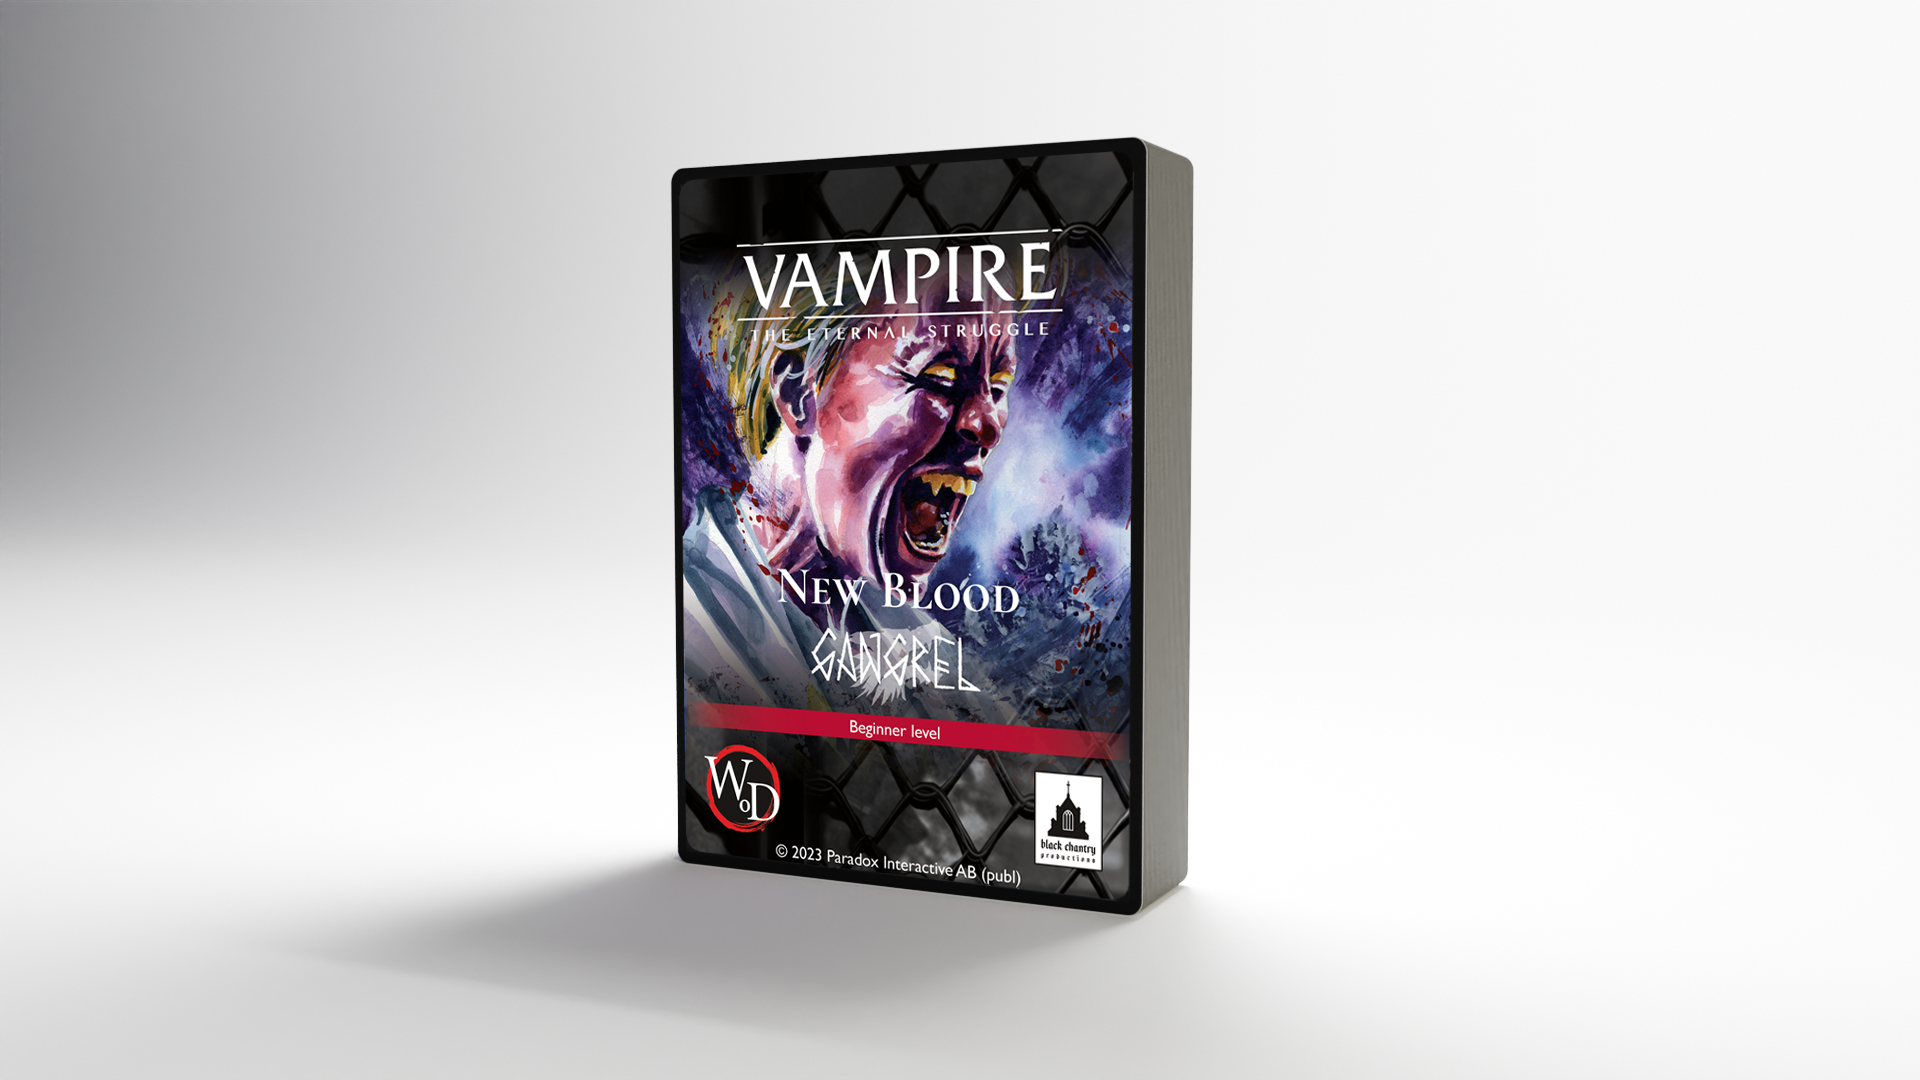 Where To Start With Vampire: The Masquerade – A Beginner's